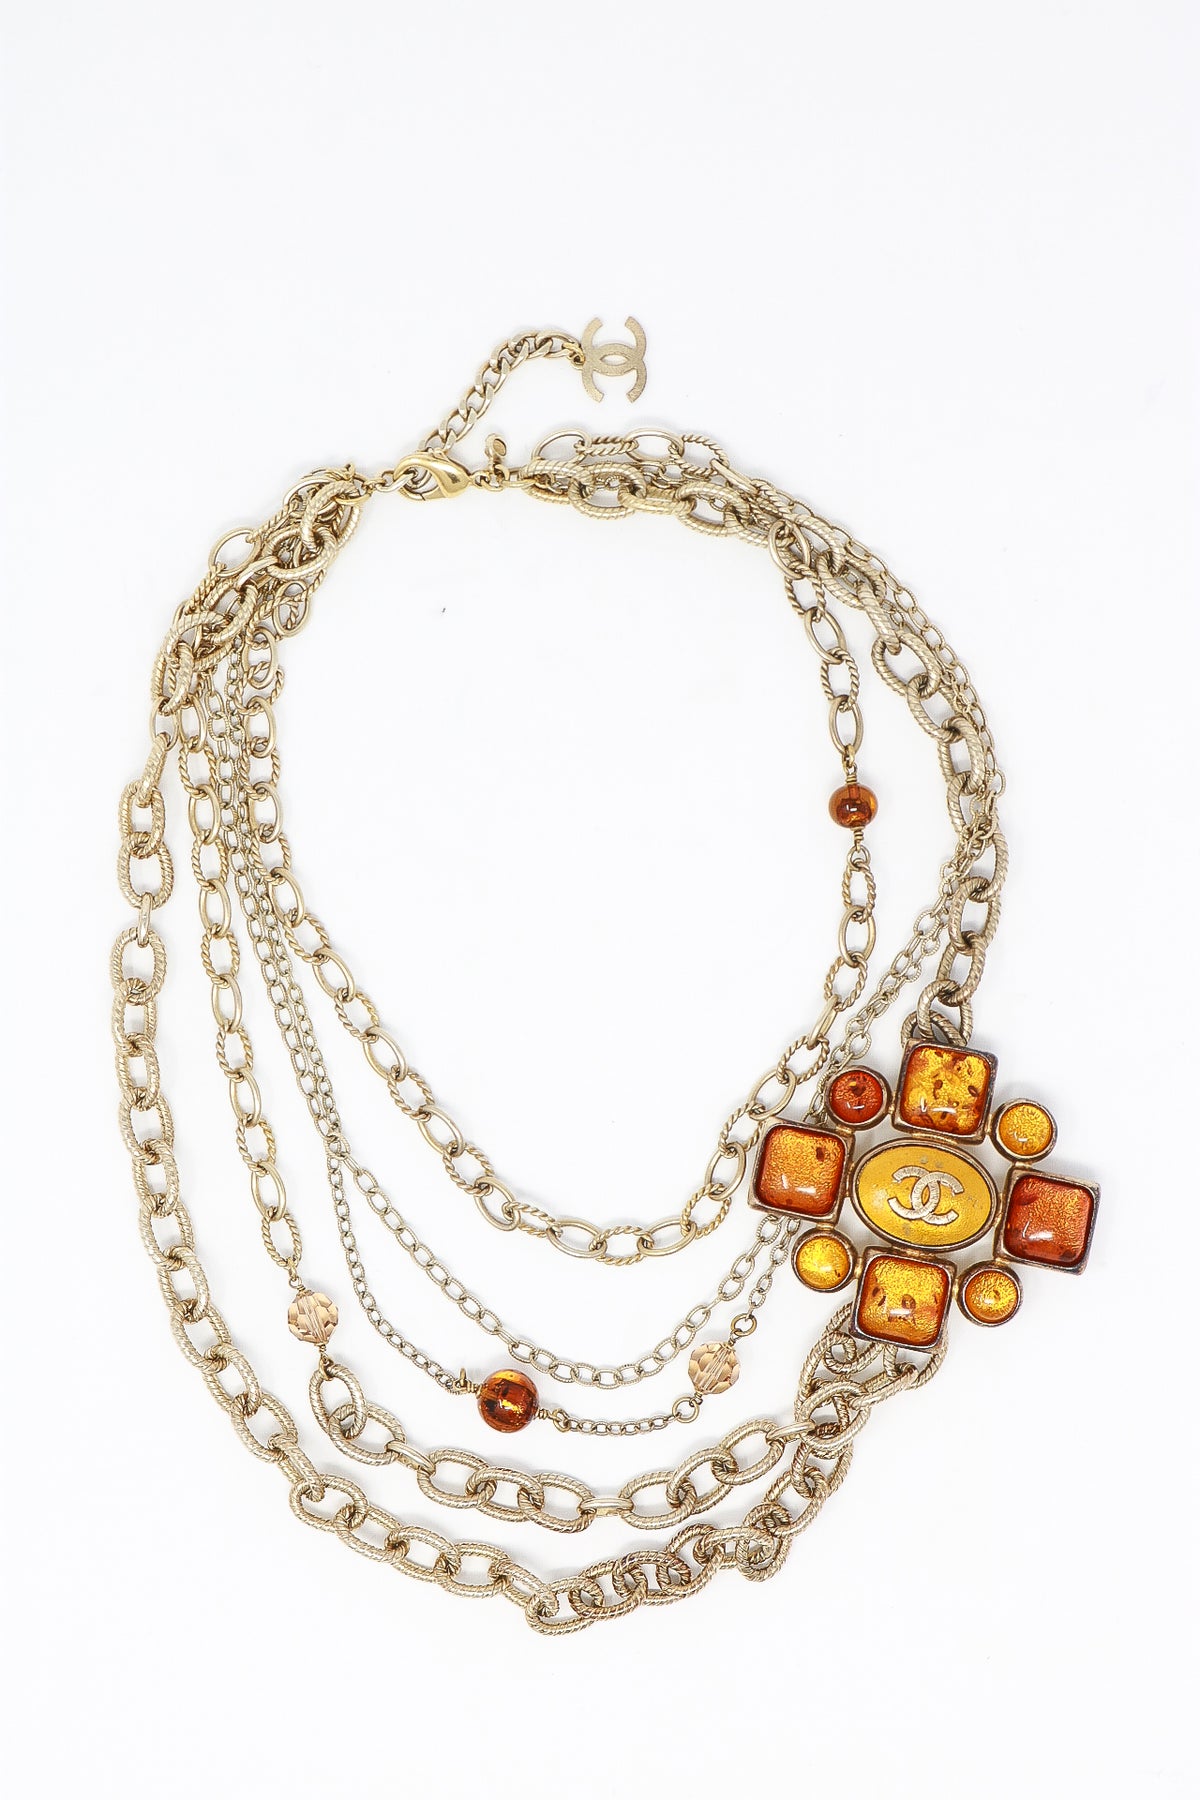 aged gold multichain necklace with orange resin ornament (flat lay view)